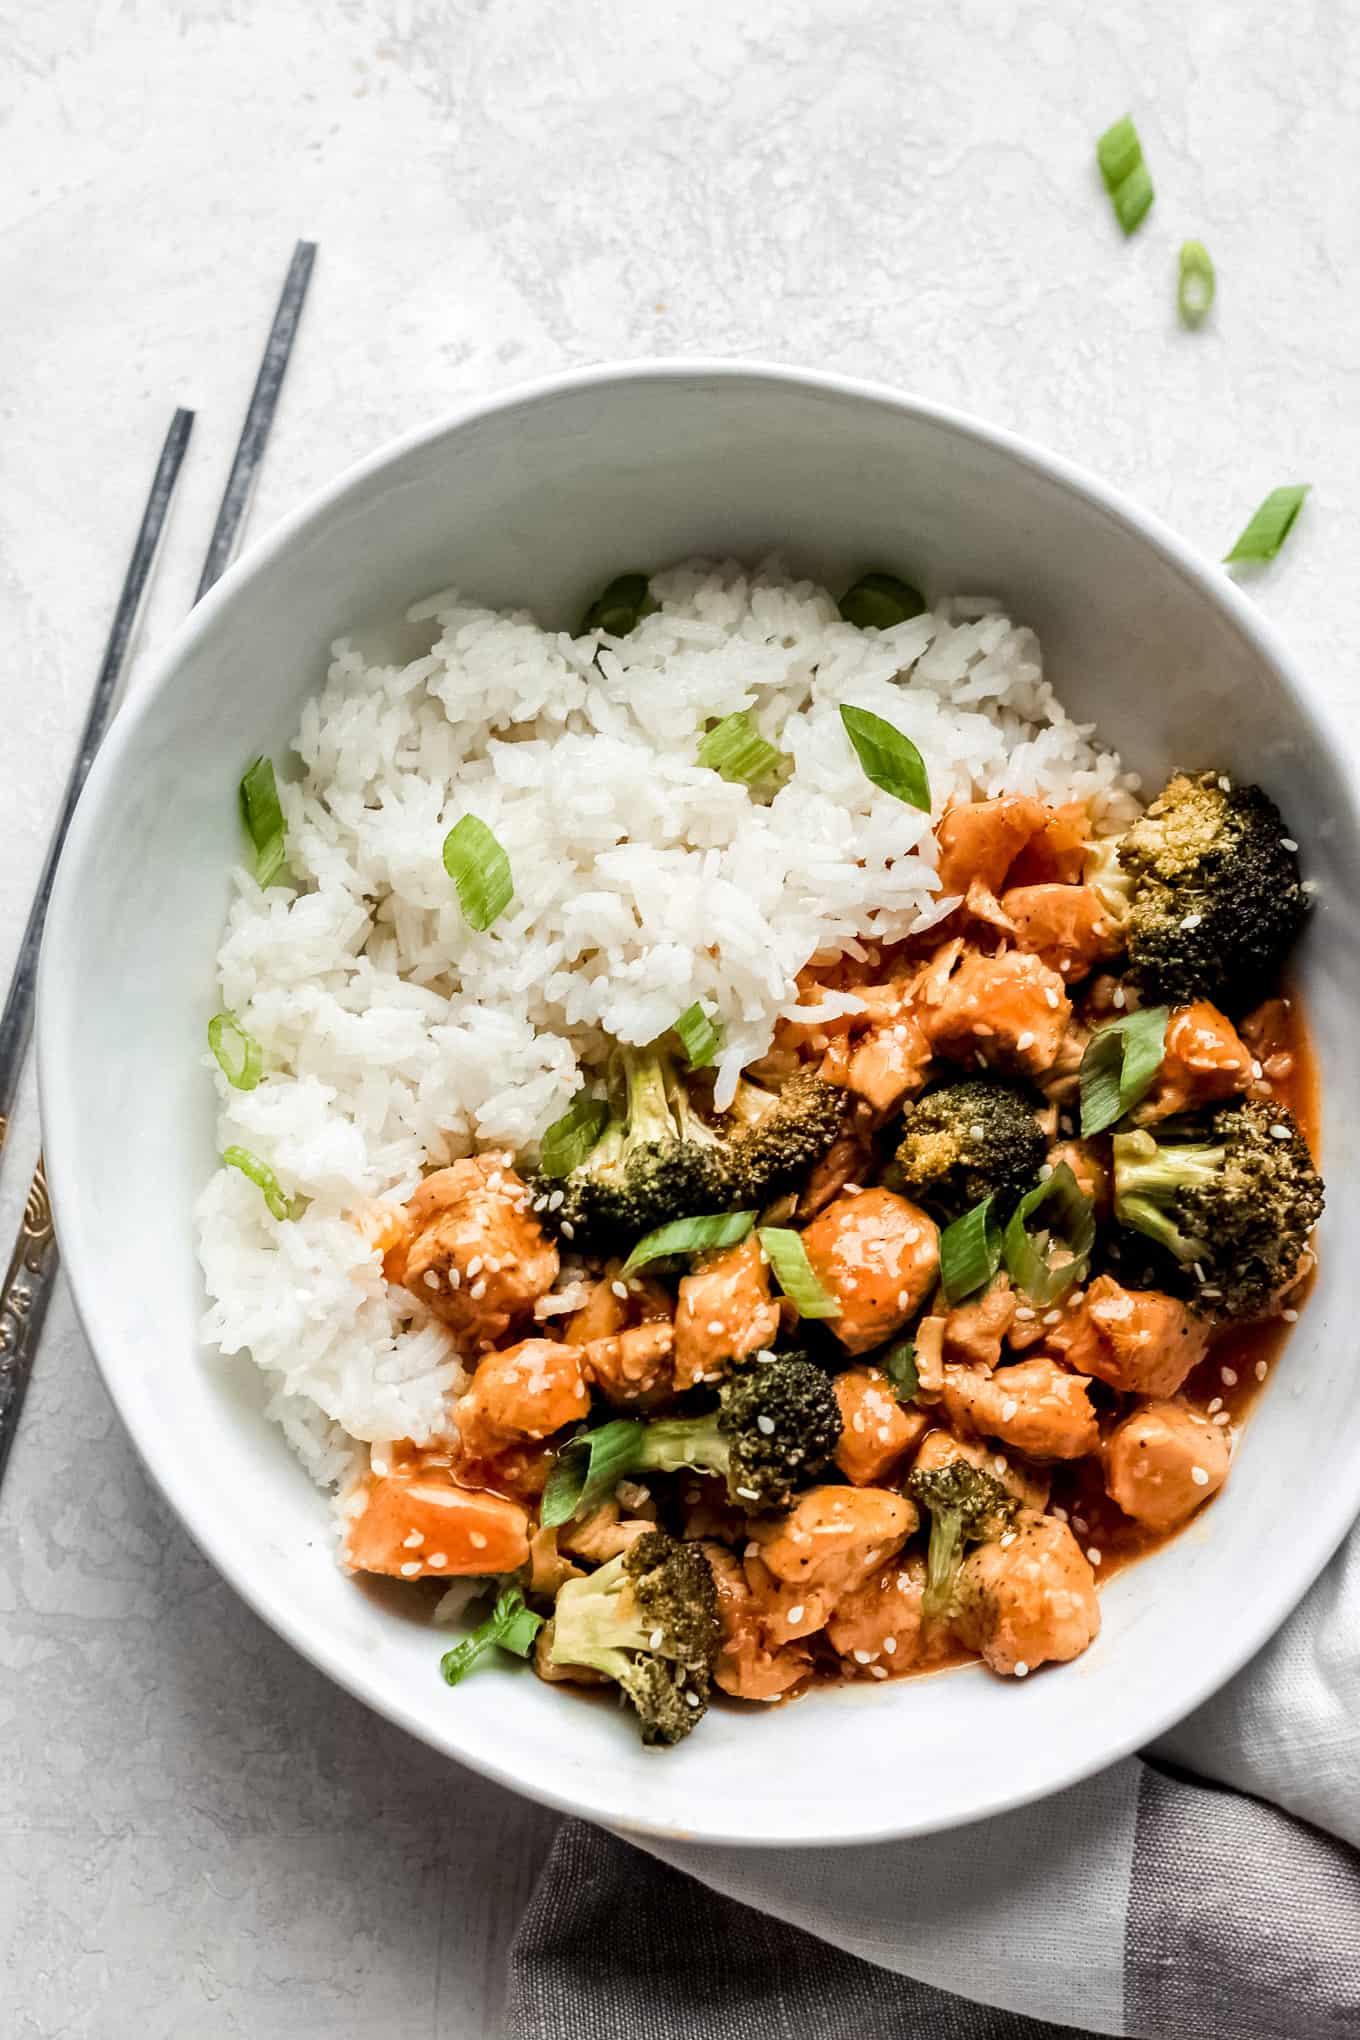 Orange chicken and broccoli in a bowl with a side of rice